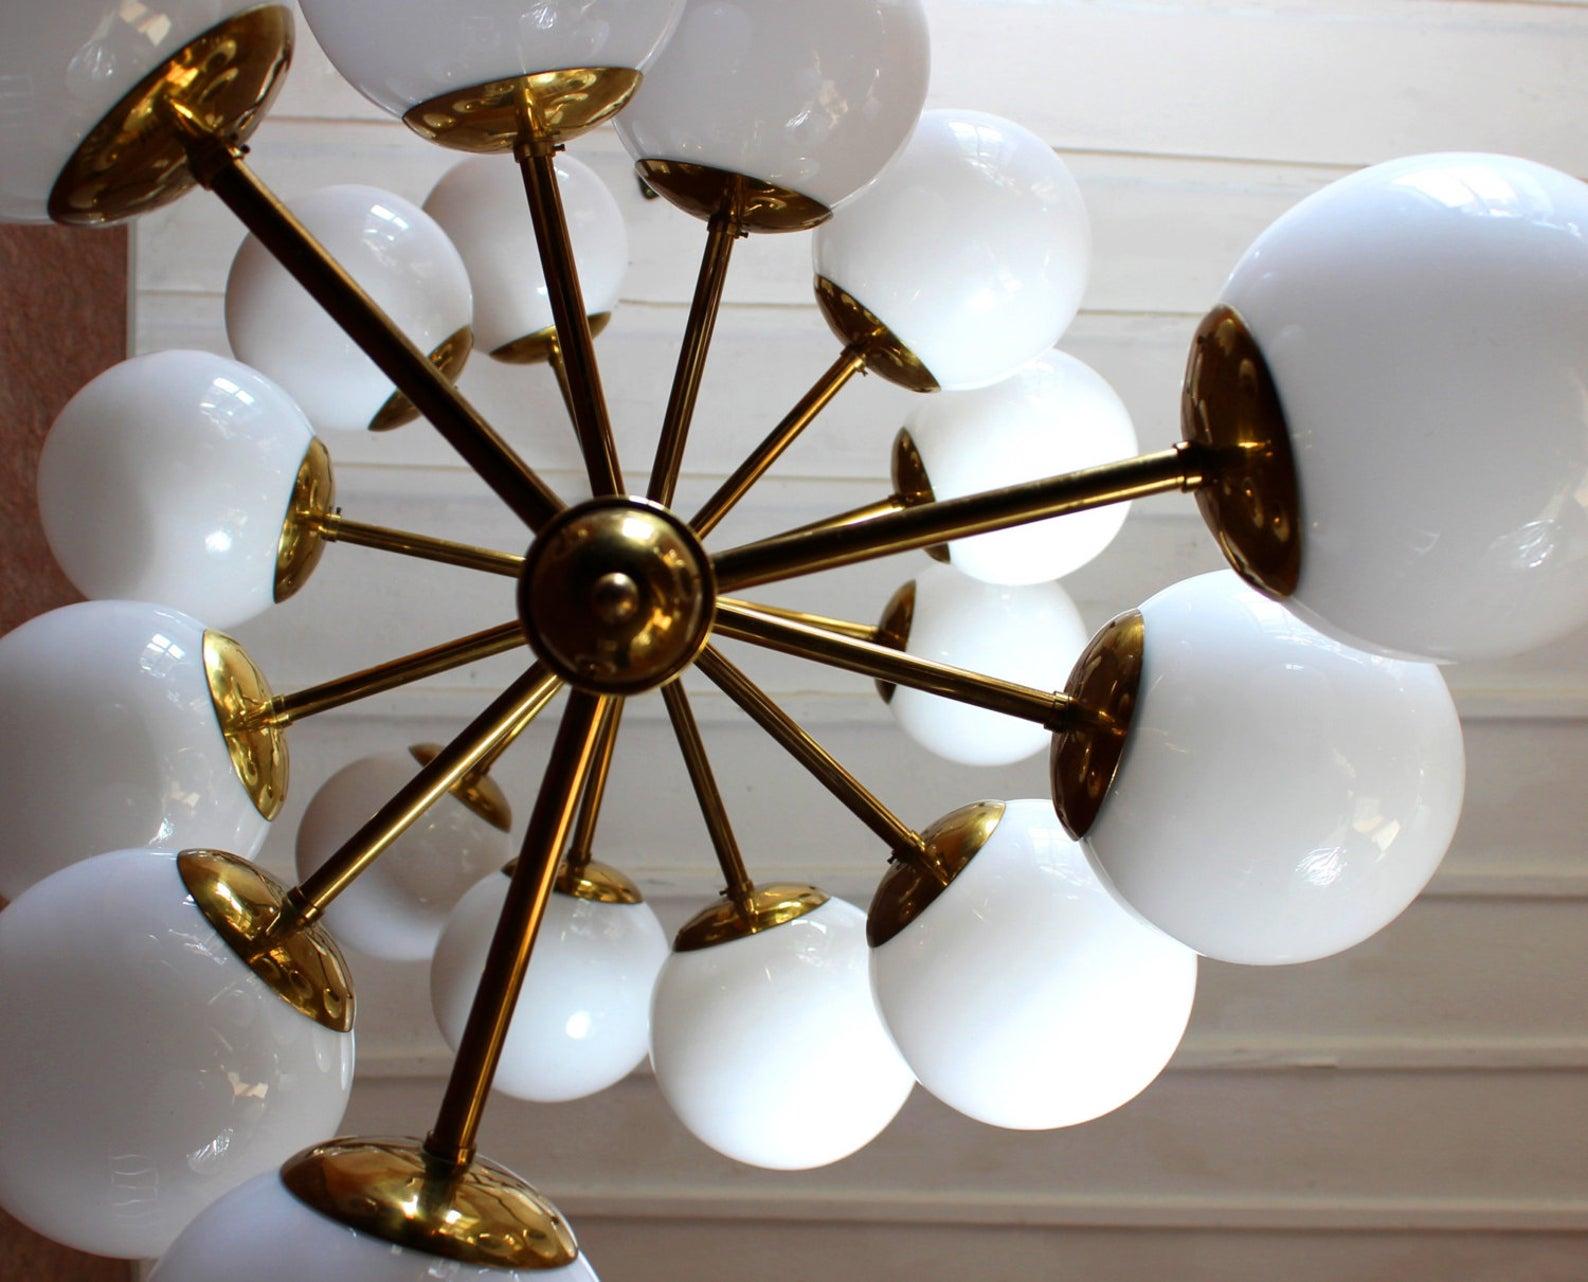 1 of 4 monumental atomic chandelier with alabaster glass globes and brass. 18 lights (E27)

Measures: Diameter 3 feet/ 90cm height 7 feet/ 213cm
 
We expose this lighting drafted by German furniture developers of the 1970s with accents of the